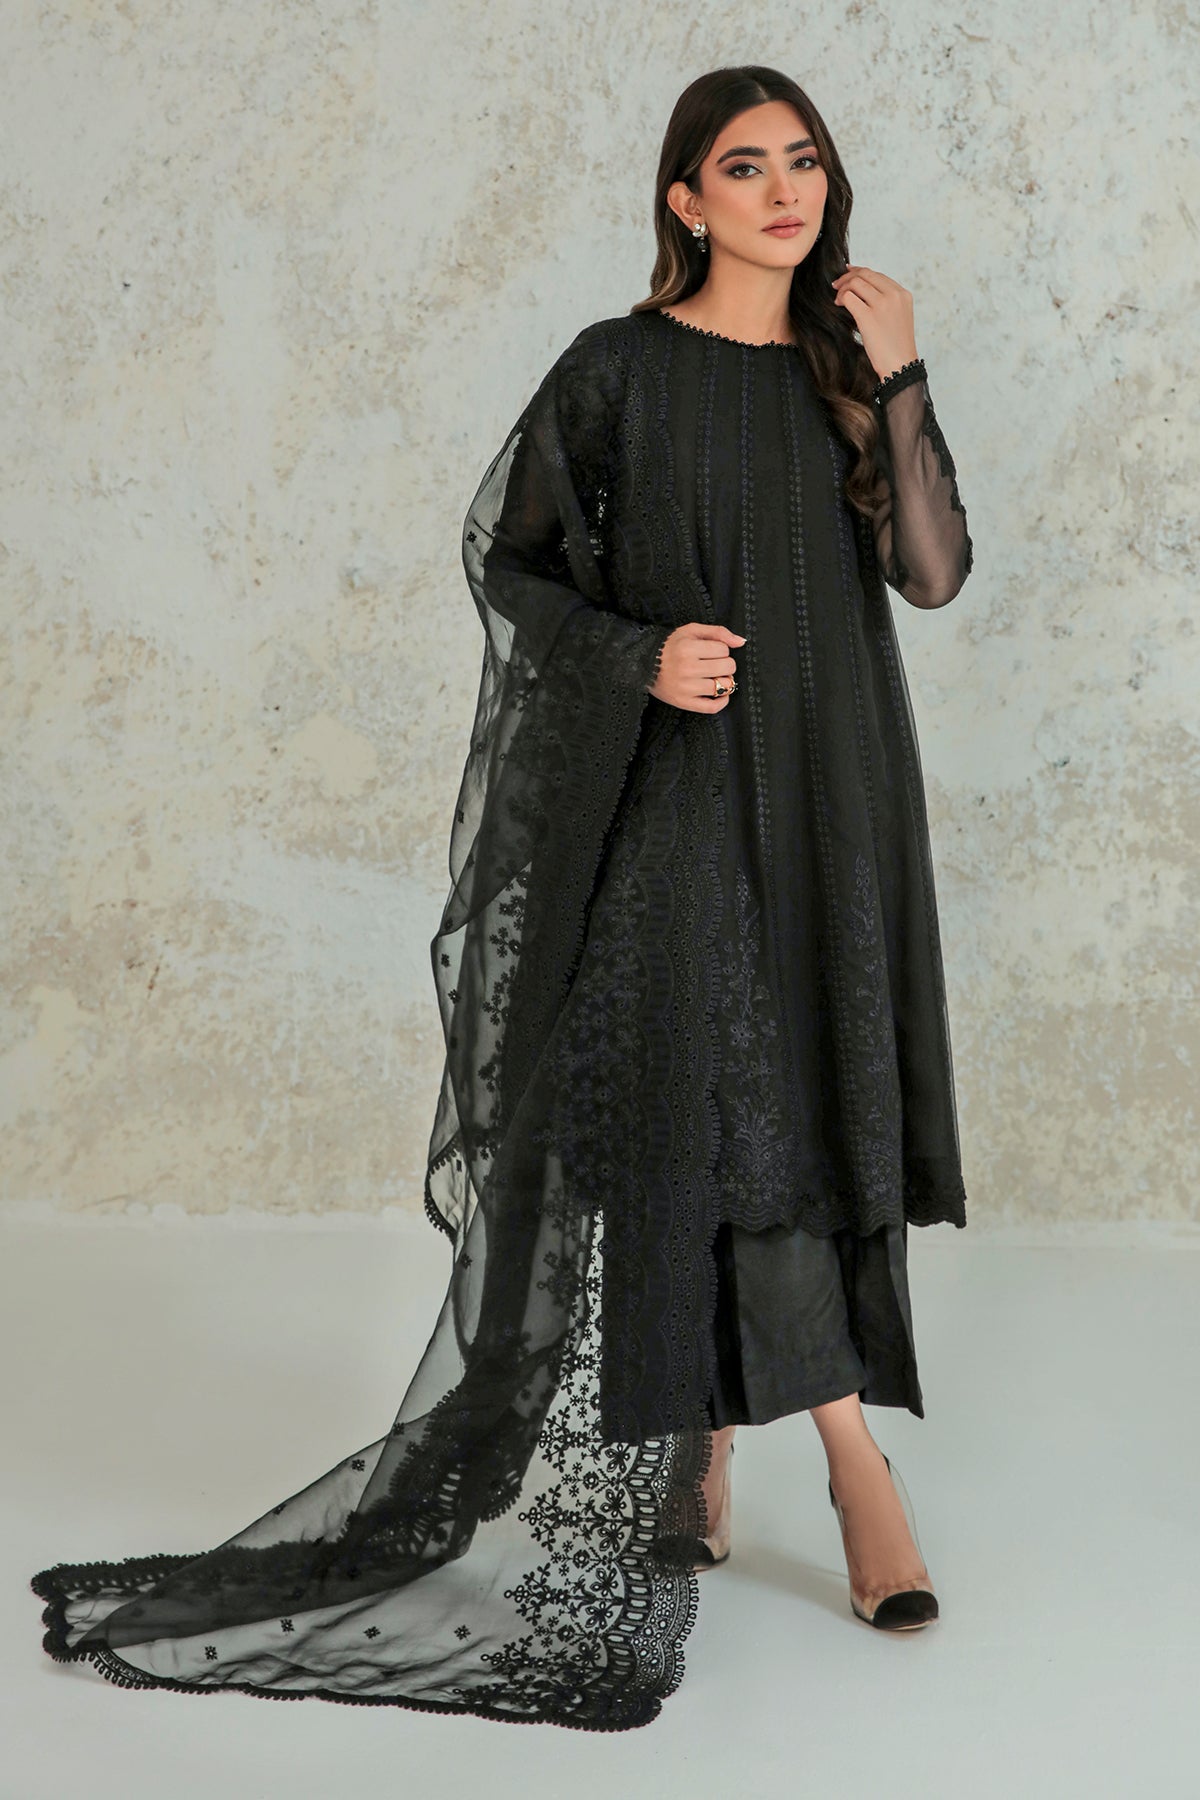 Jaguar Embroidered Pakistani Shalwar Kameez Ready Made Womens Black Net  Clothes girls Outfits Ladies Dresses for Wedding/event/party - Etsy Canada  | Black pakistani dress, Pakistani dresses casual, Simple pakistani dresses